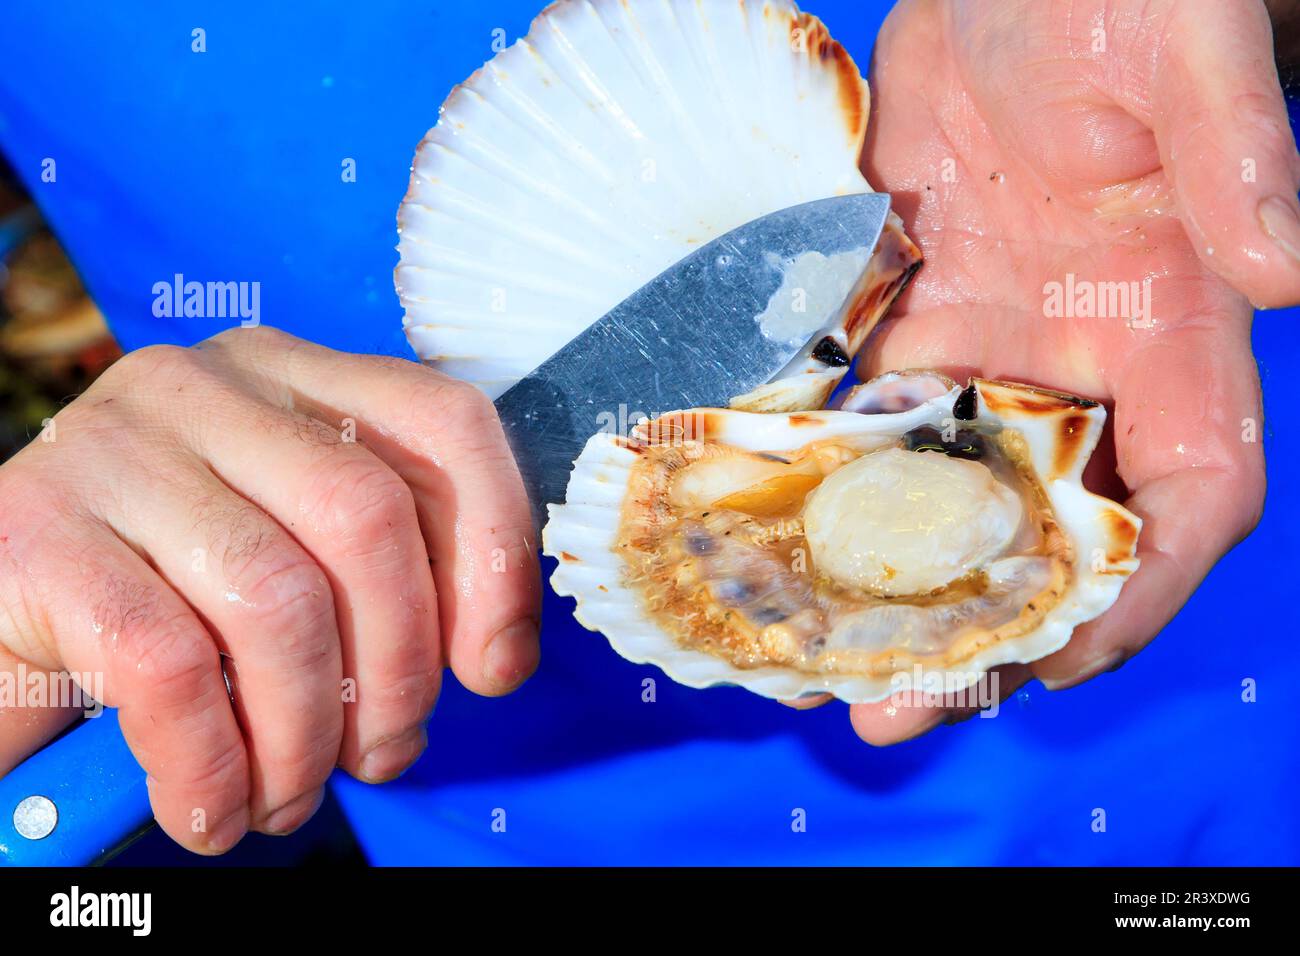 Scallop in a fish shop. Fishmonger holding an open scallop in his hands Stock Photo